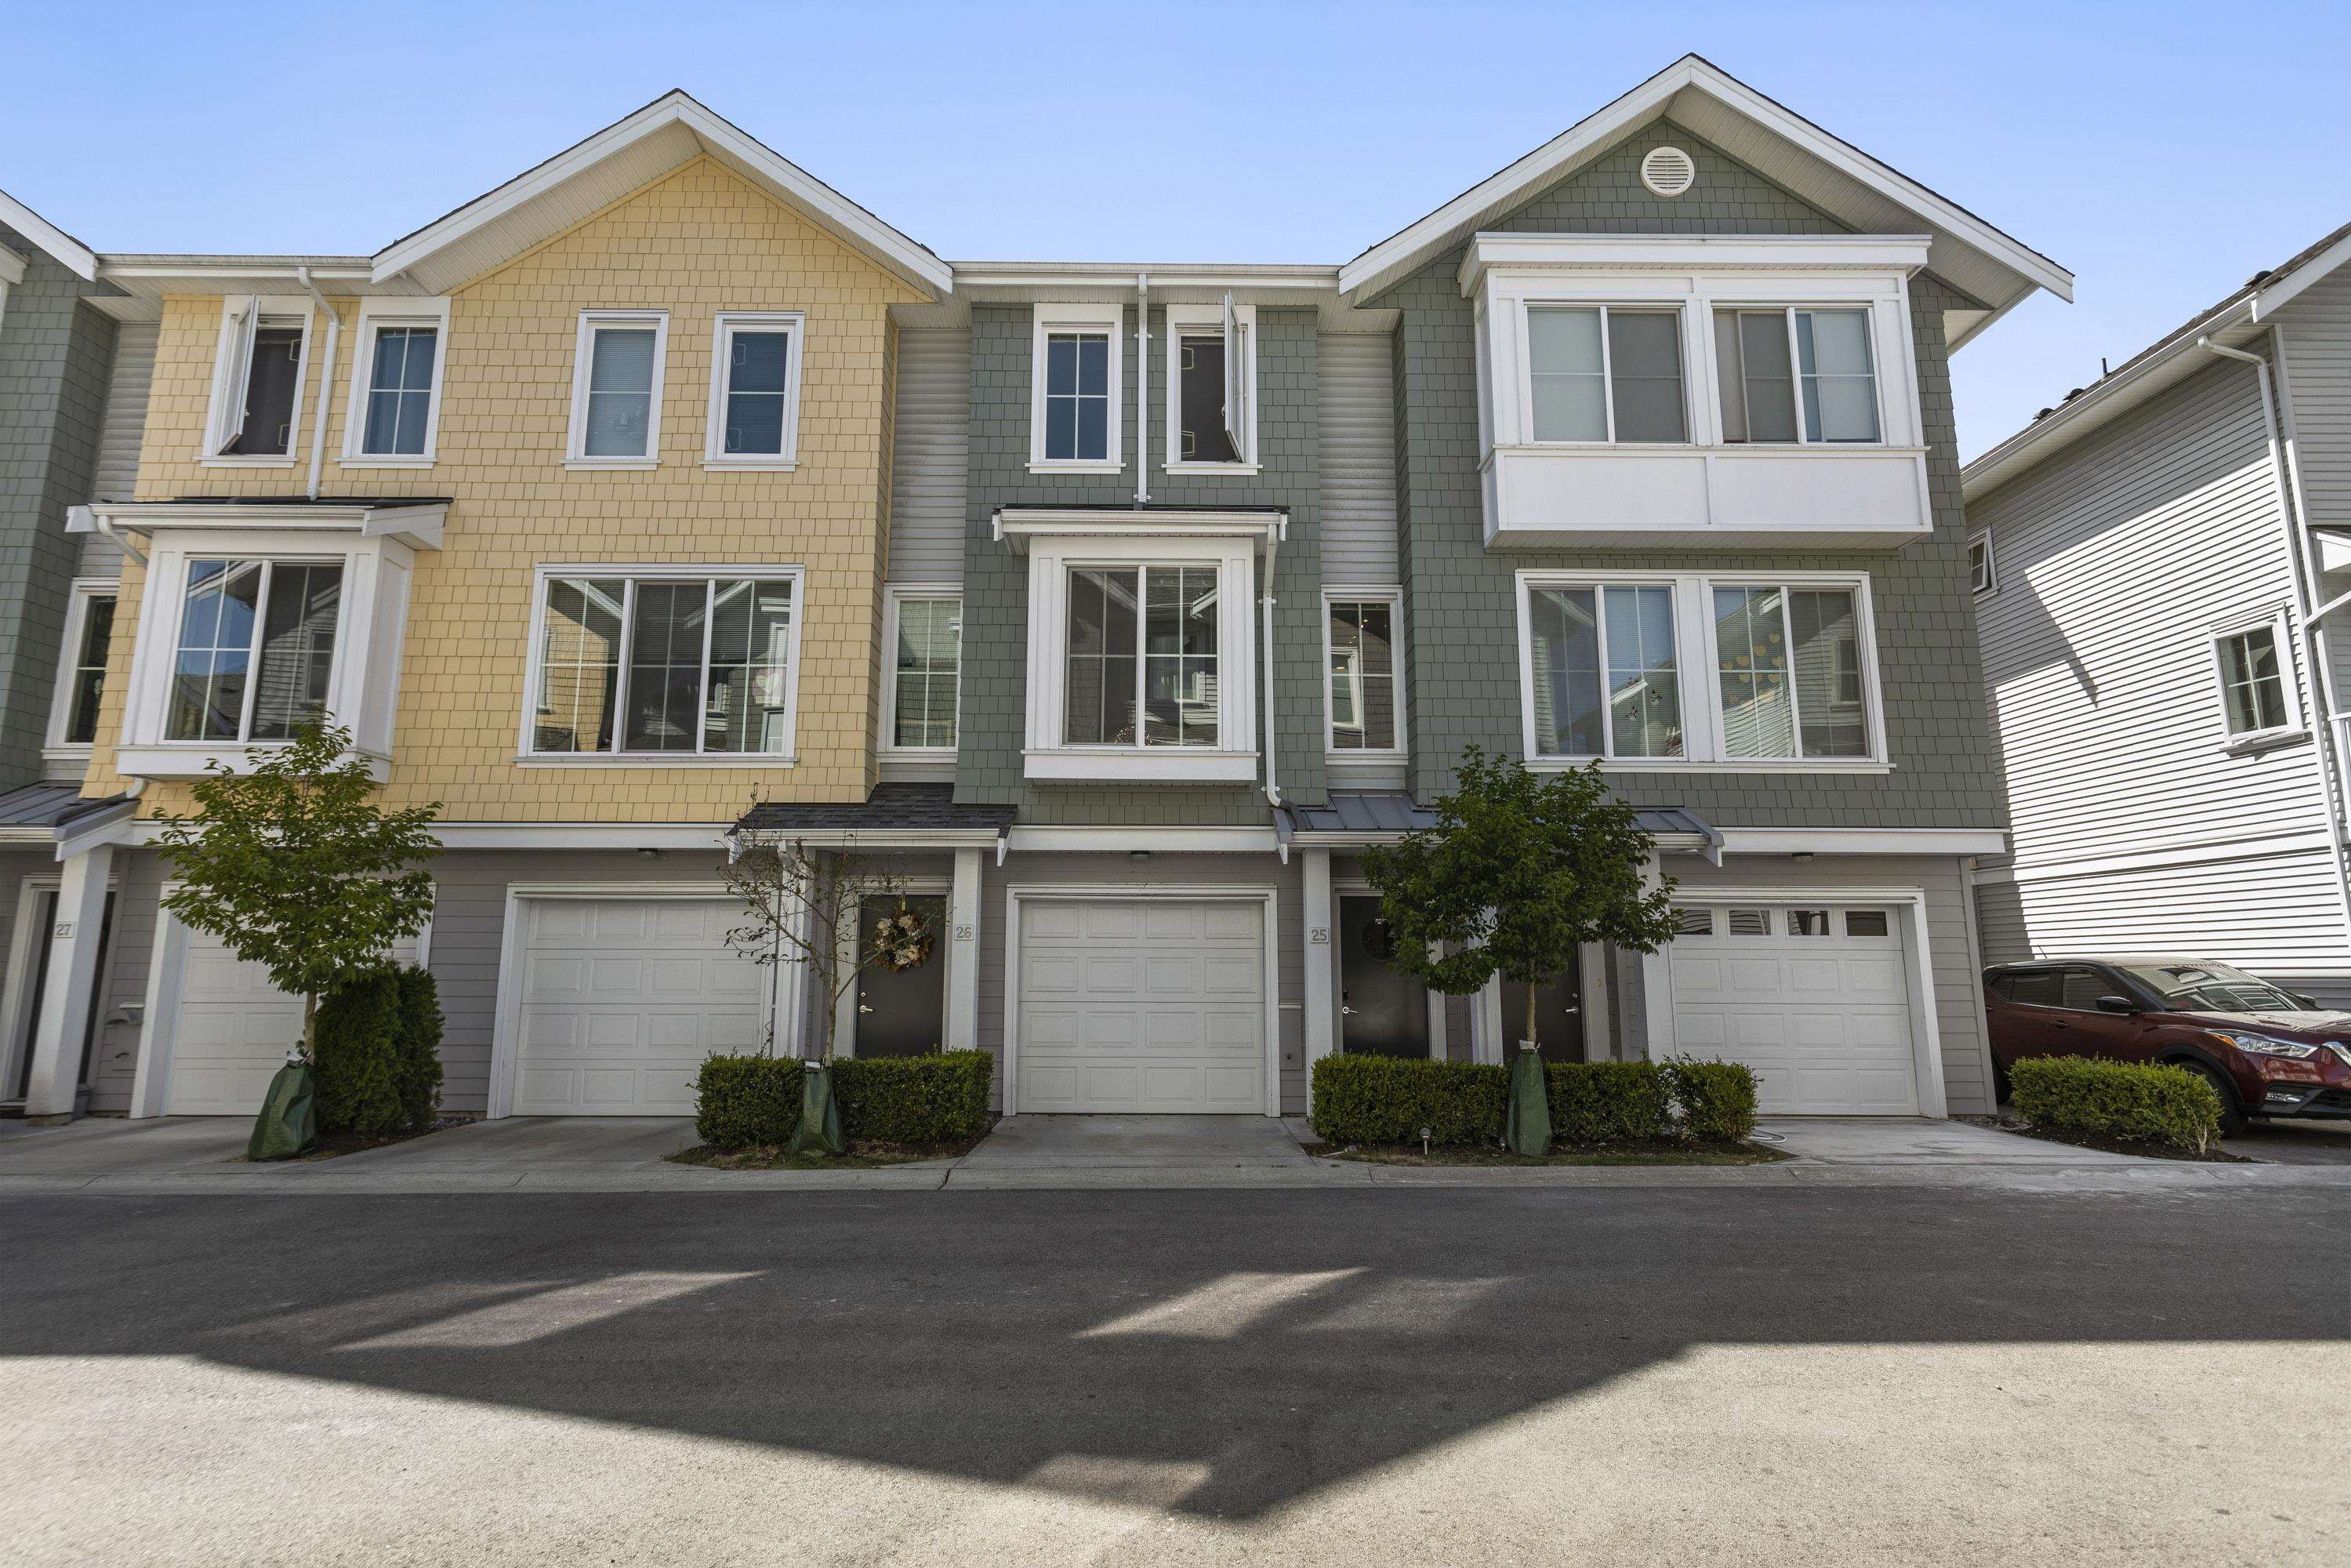 Listing image of 25 5550 ADMIRAL WAY